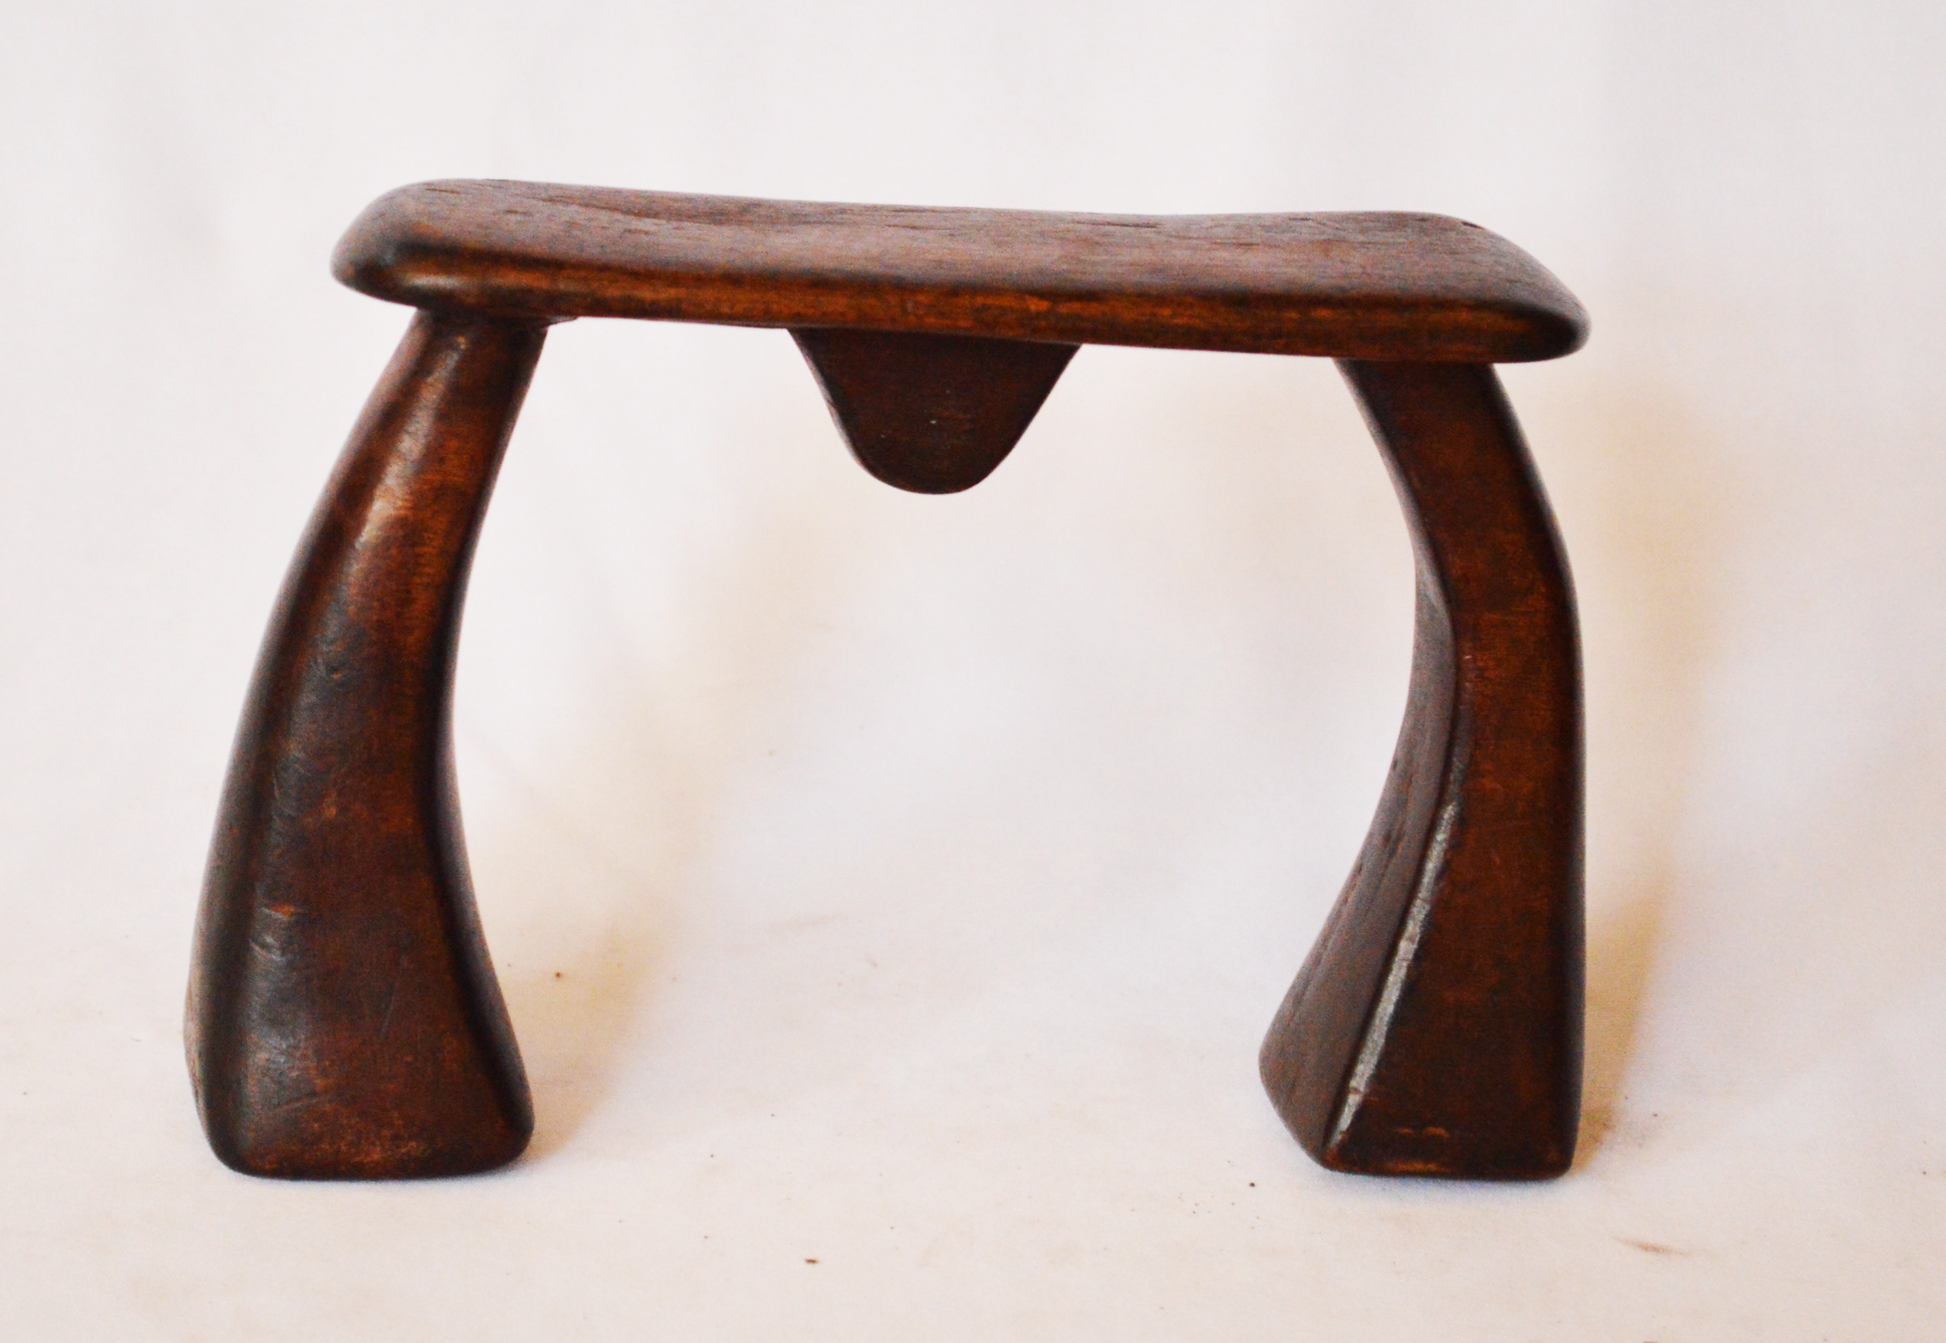 Bari Headrest - Authentic African handicrafts | Clothing, bags, painting, toys & more - CULTURE HUB by Muthoni Unchained